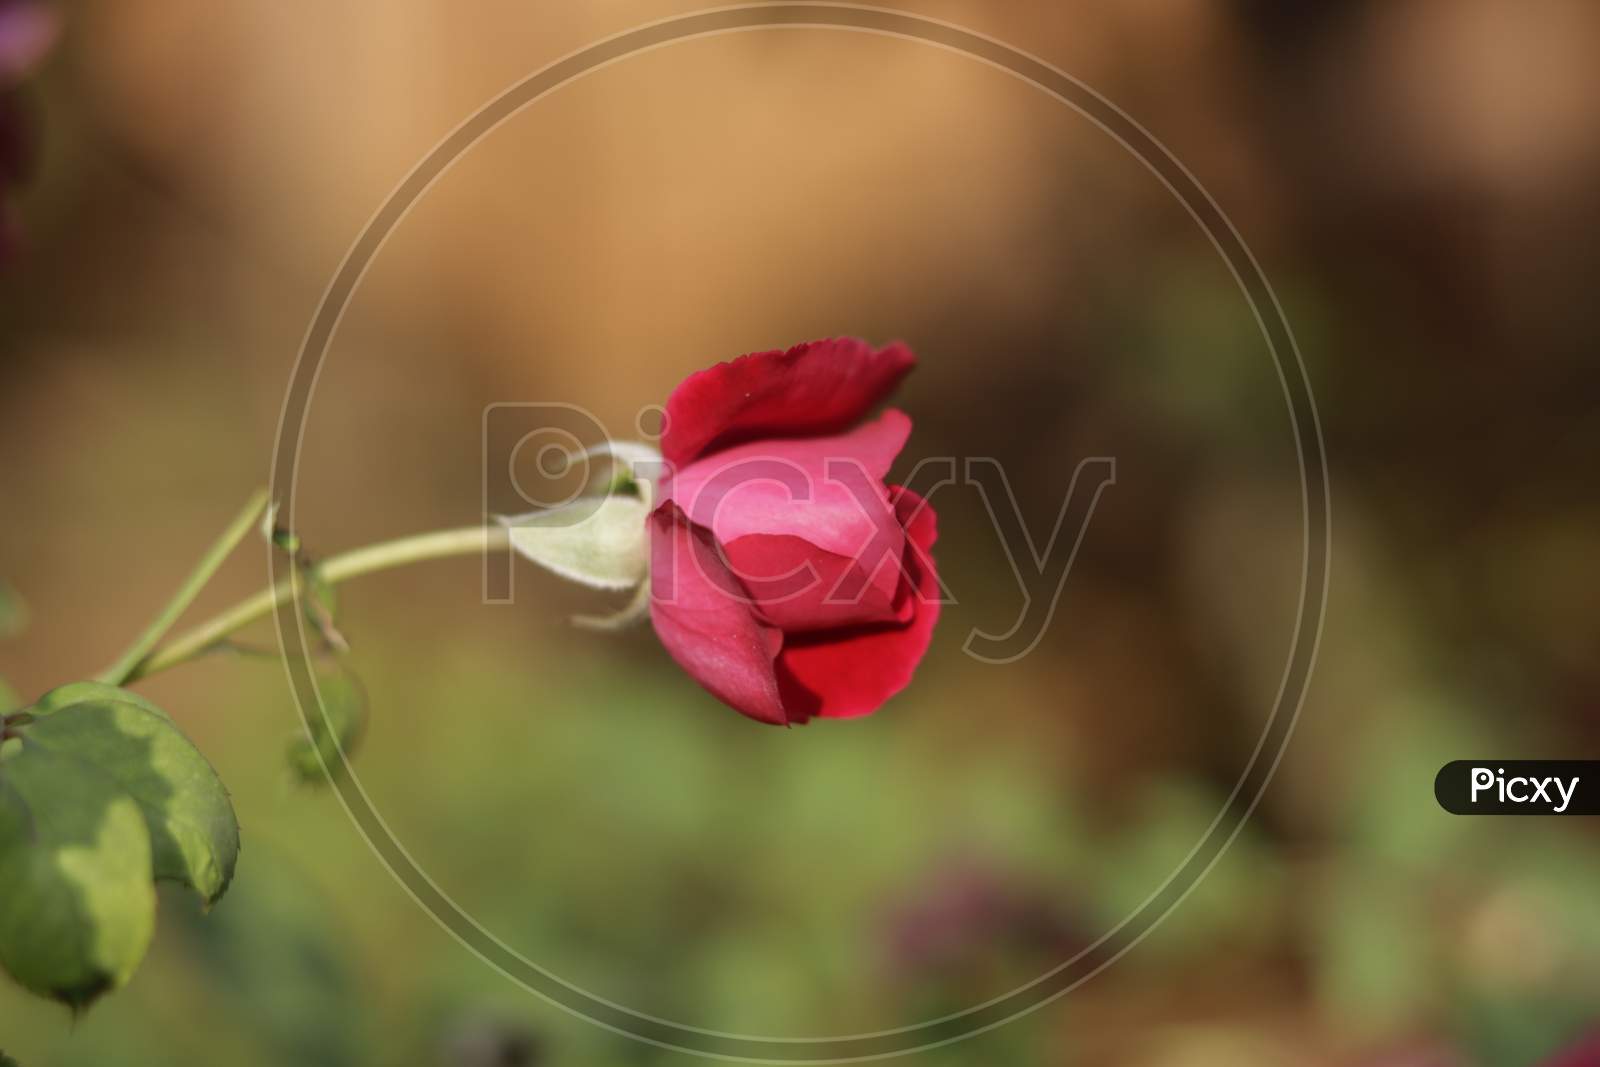 Pink rose in nature on green background